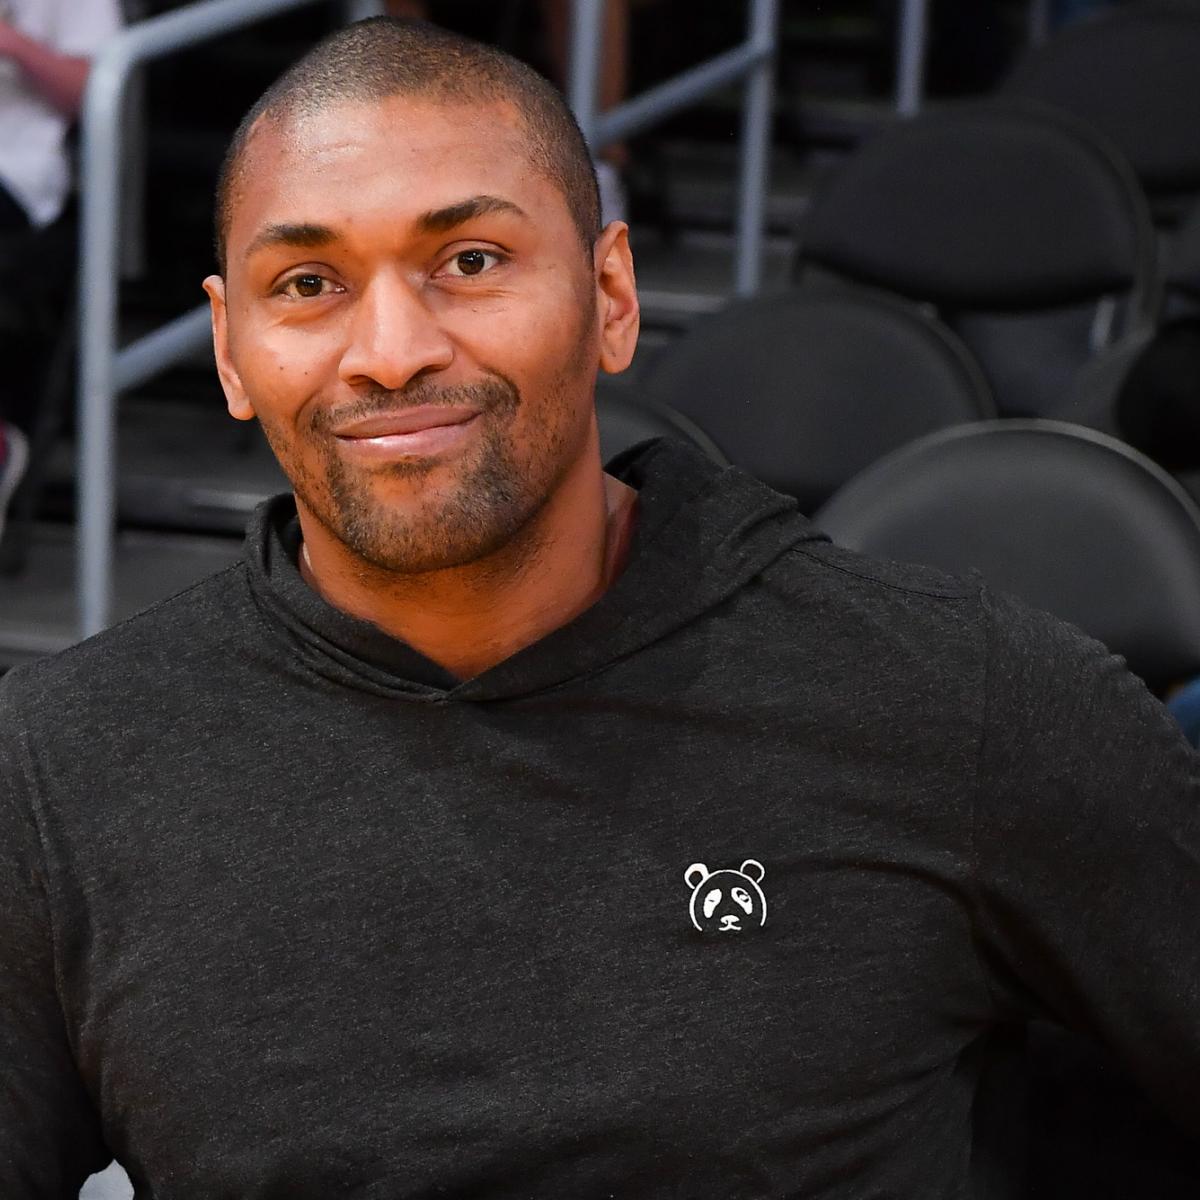 Metta World Peace Jerry Krause Said 7th Ring Would Destroy Those Other 6 Titles Bleacher Report Latest News Videos And Highlights